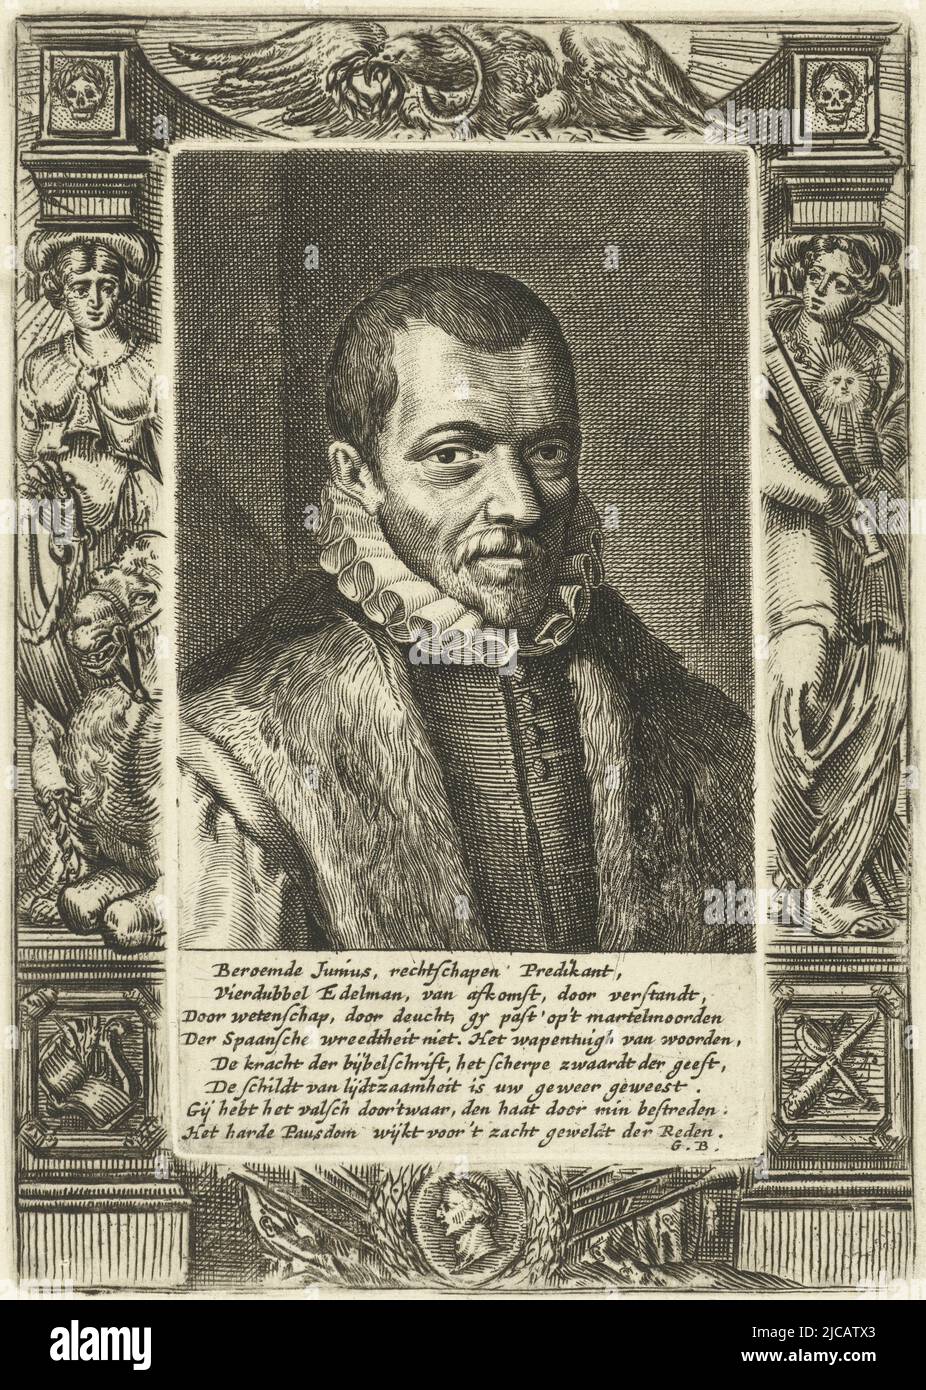 Print printed from two plates Bust of Franciscus Junius, with an eight-line poem in Dutch by Geeraert Brandt Framing with allegorical figures and symbols, Portrait of Franciscus Junius I, print maker: Hendrik Bary, print maker: Romeyn de Hooghe, (attributed to), Geeraert Brandt (I), (mentioned on object), Netherlands, 1657 - 1707, paper, etching, engraving, h 166 mm × w 118 mm × h 131 mm × w 77 mm Stock Photo